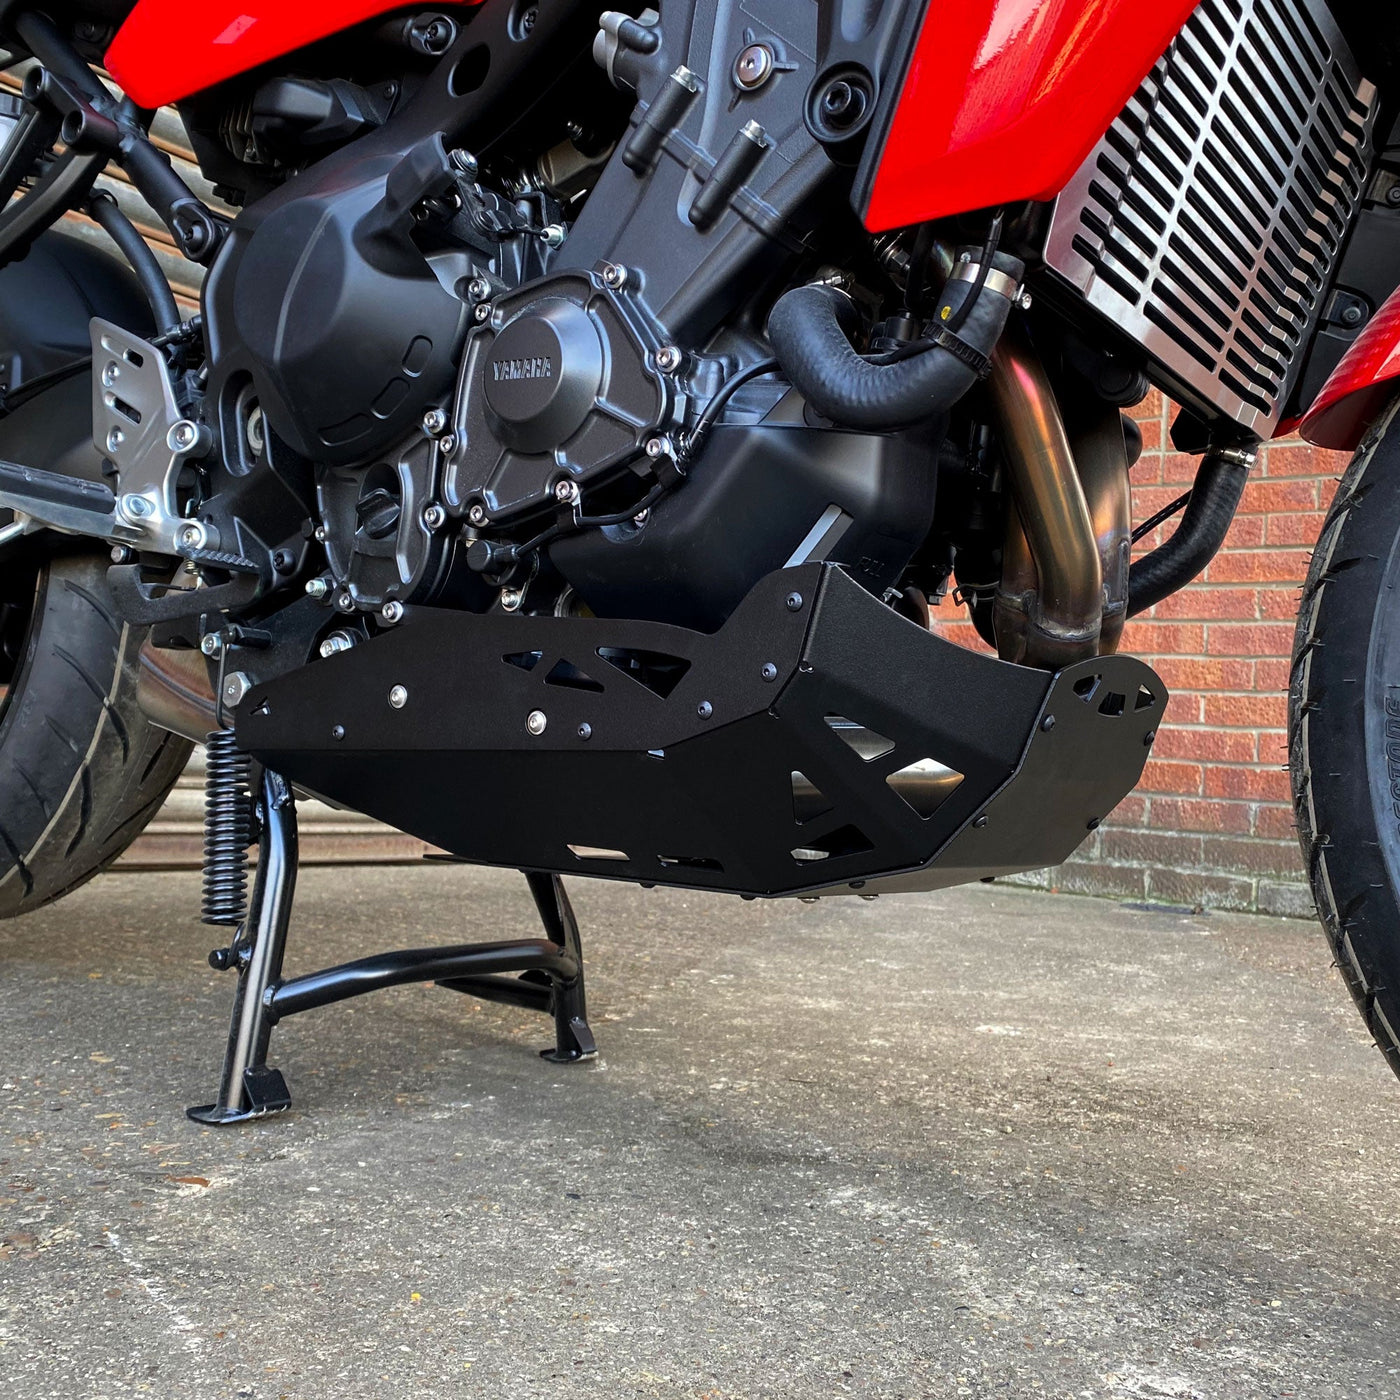 PYRAMID Engine Plate for Yamaha MT-09 / SP, Tracer 9 / GT / GT+ & XSR 900